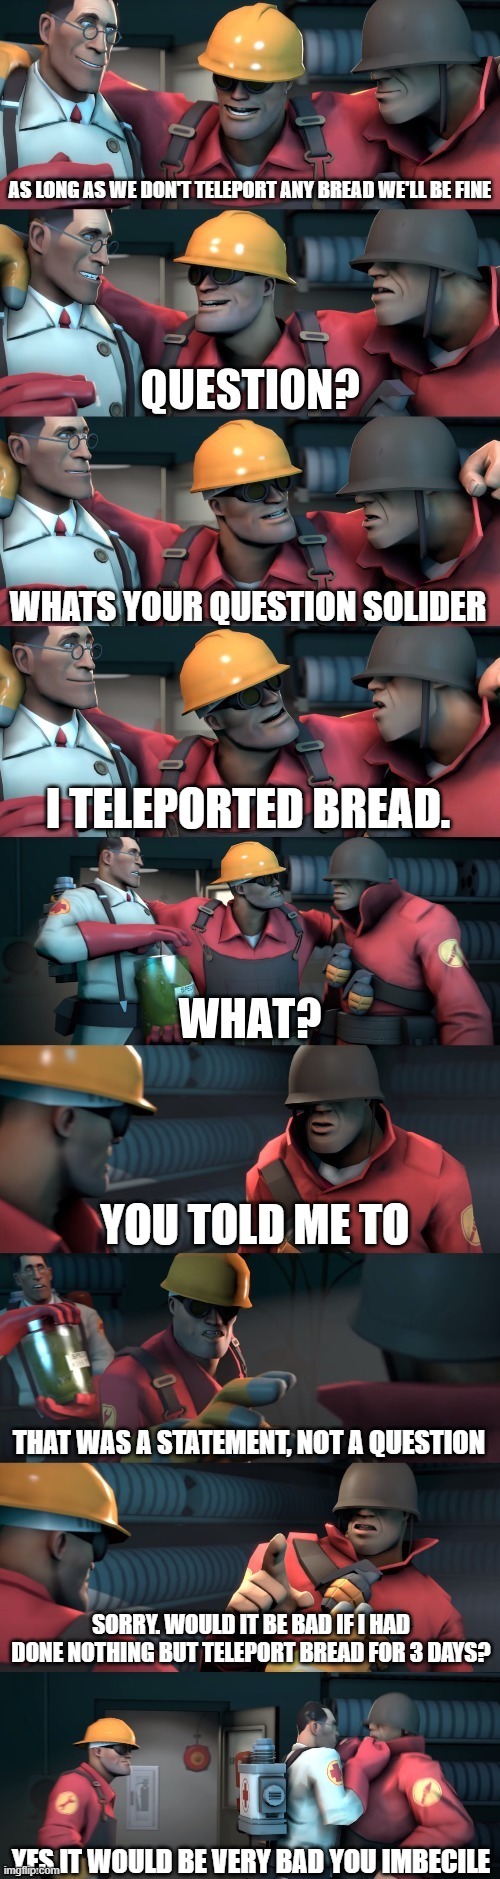 Grammar police be like | AS LONG AS WE DON'T TELEPORT ANY BREAD WE'LL BE FINE; WHATS YOUR QUESTION SOLIDER; I TELEPORTED BREAD. YOU TOLD ME TO; THAT WAS A STATEMENT, NOT A QUESTION; SORRY. WOULD IT BE BAD IF I HAD DONE NOTHING BUT TELEPORT BREAD FOR 3 DAYS? YES IT WOULD BE VERY BAD YOU IMBECILE | image tagged in tf2 teleport bread meme english,funny,meme,team fortress 2,grammar nazi | made w/ Imgflip meme maker